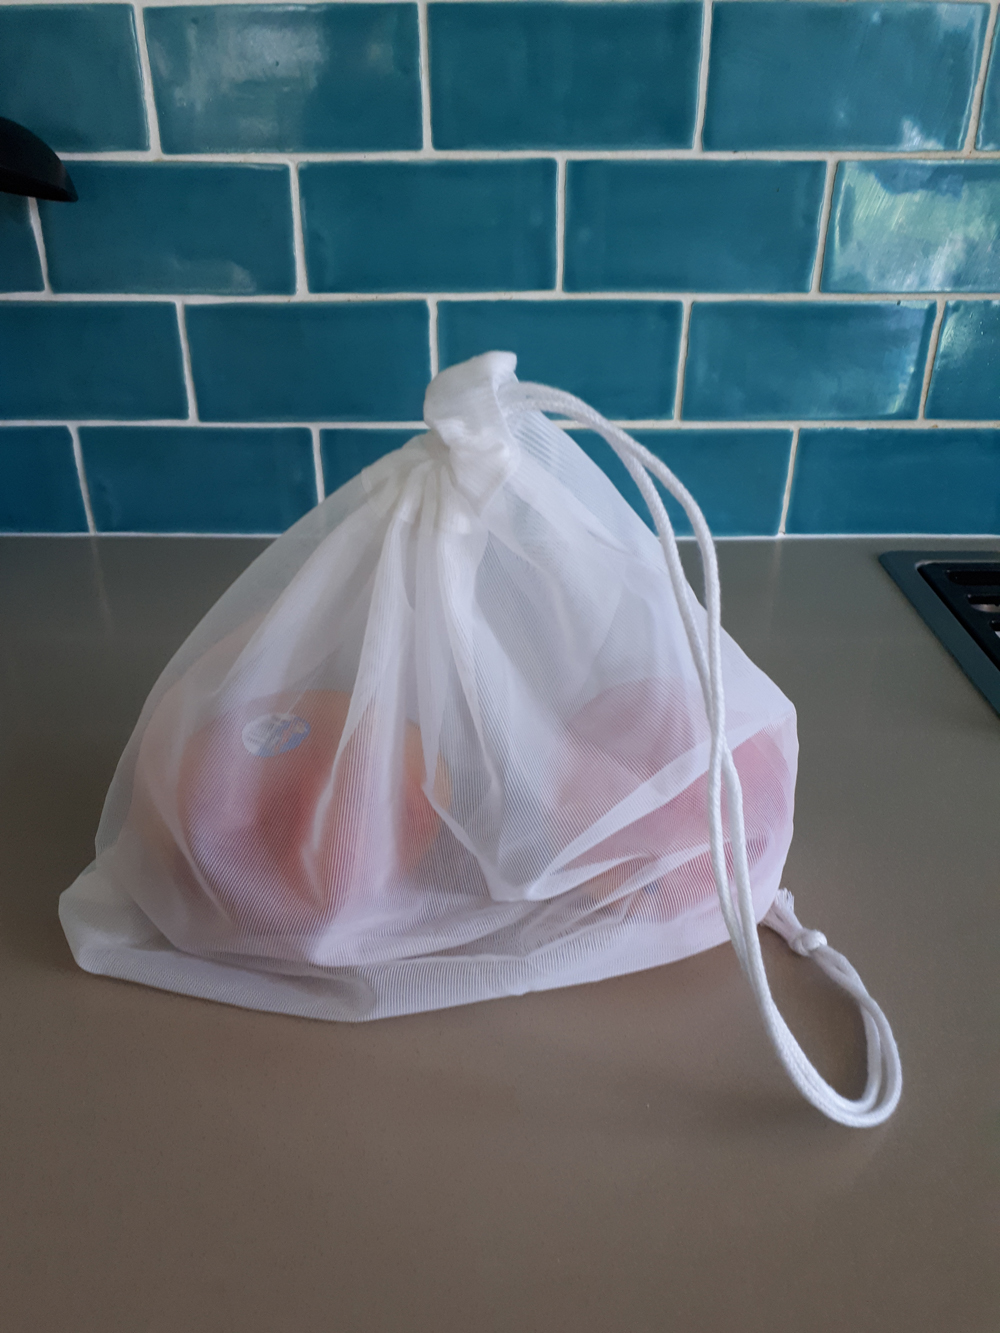 Tutorial – How to make Reusable Produce Bags